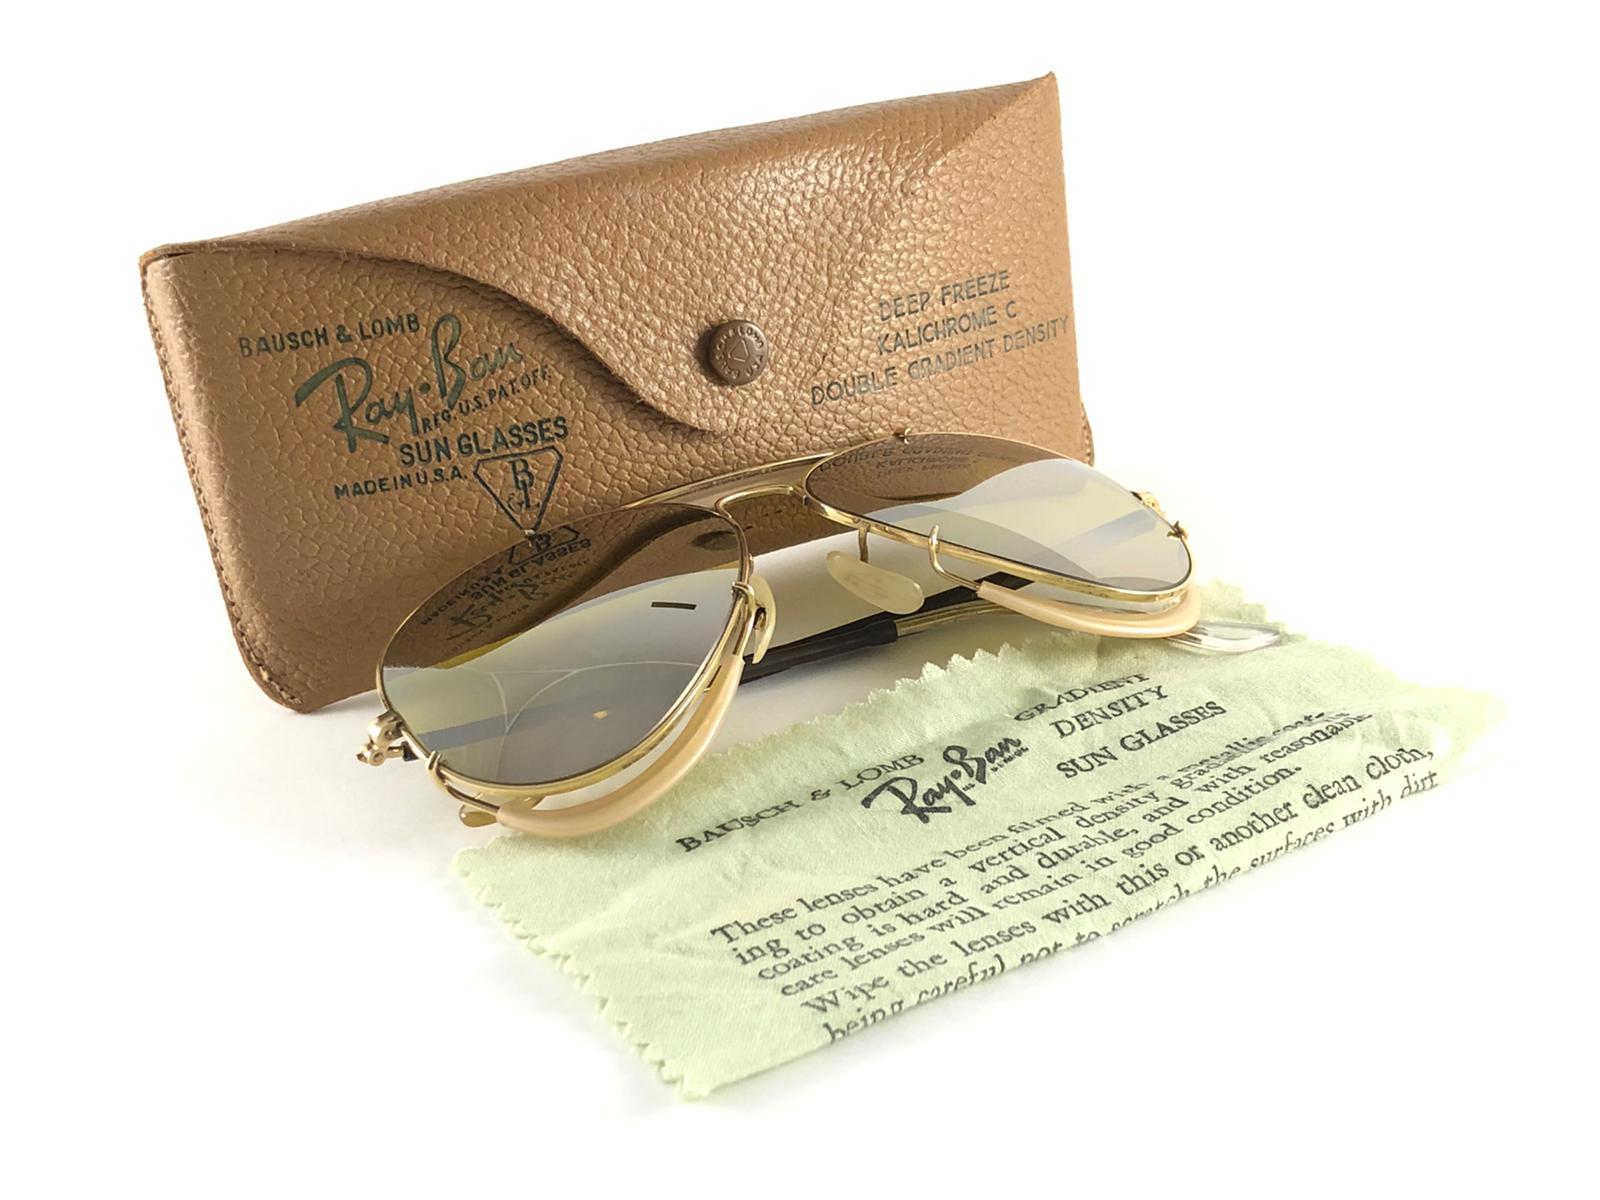 New Ray Ban Deep Freeze 12K Gold Kalichrome Collectors Item USA Sunglasses For Sale 9